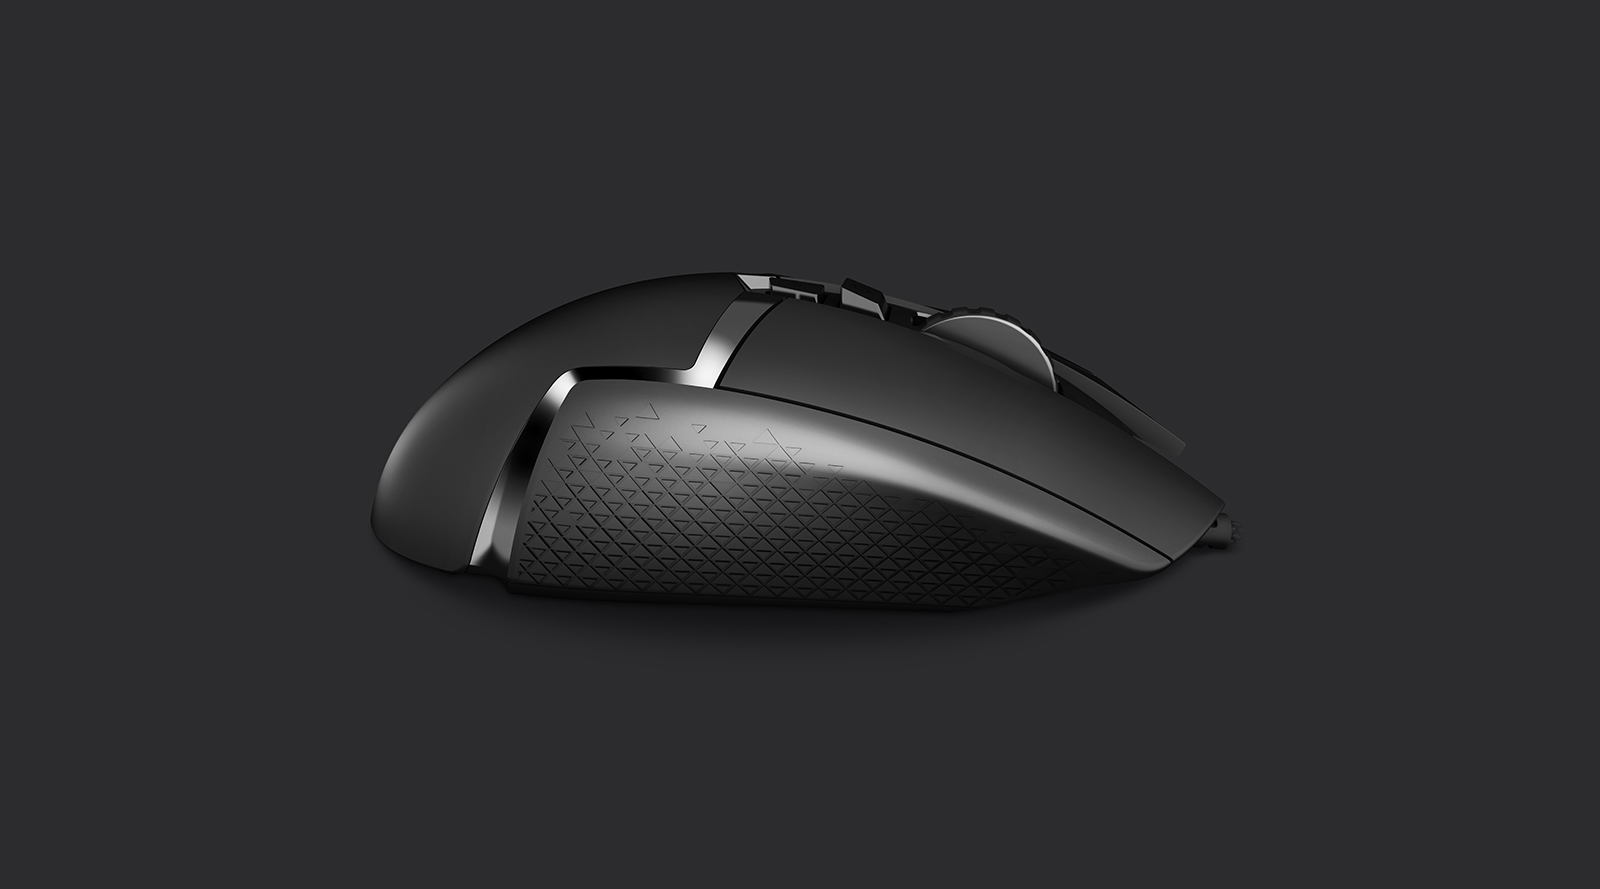 3D Product Modeling-Logitech Proteus Gaming Mouse- Produced by Digital Imaging Group LLC